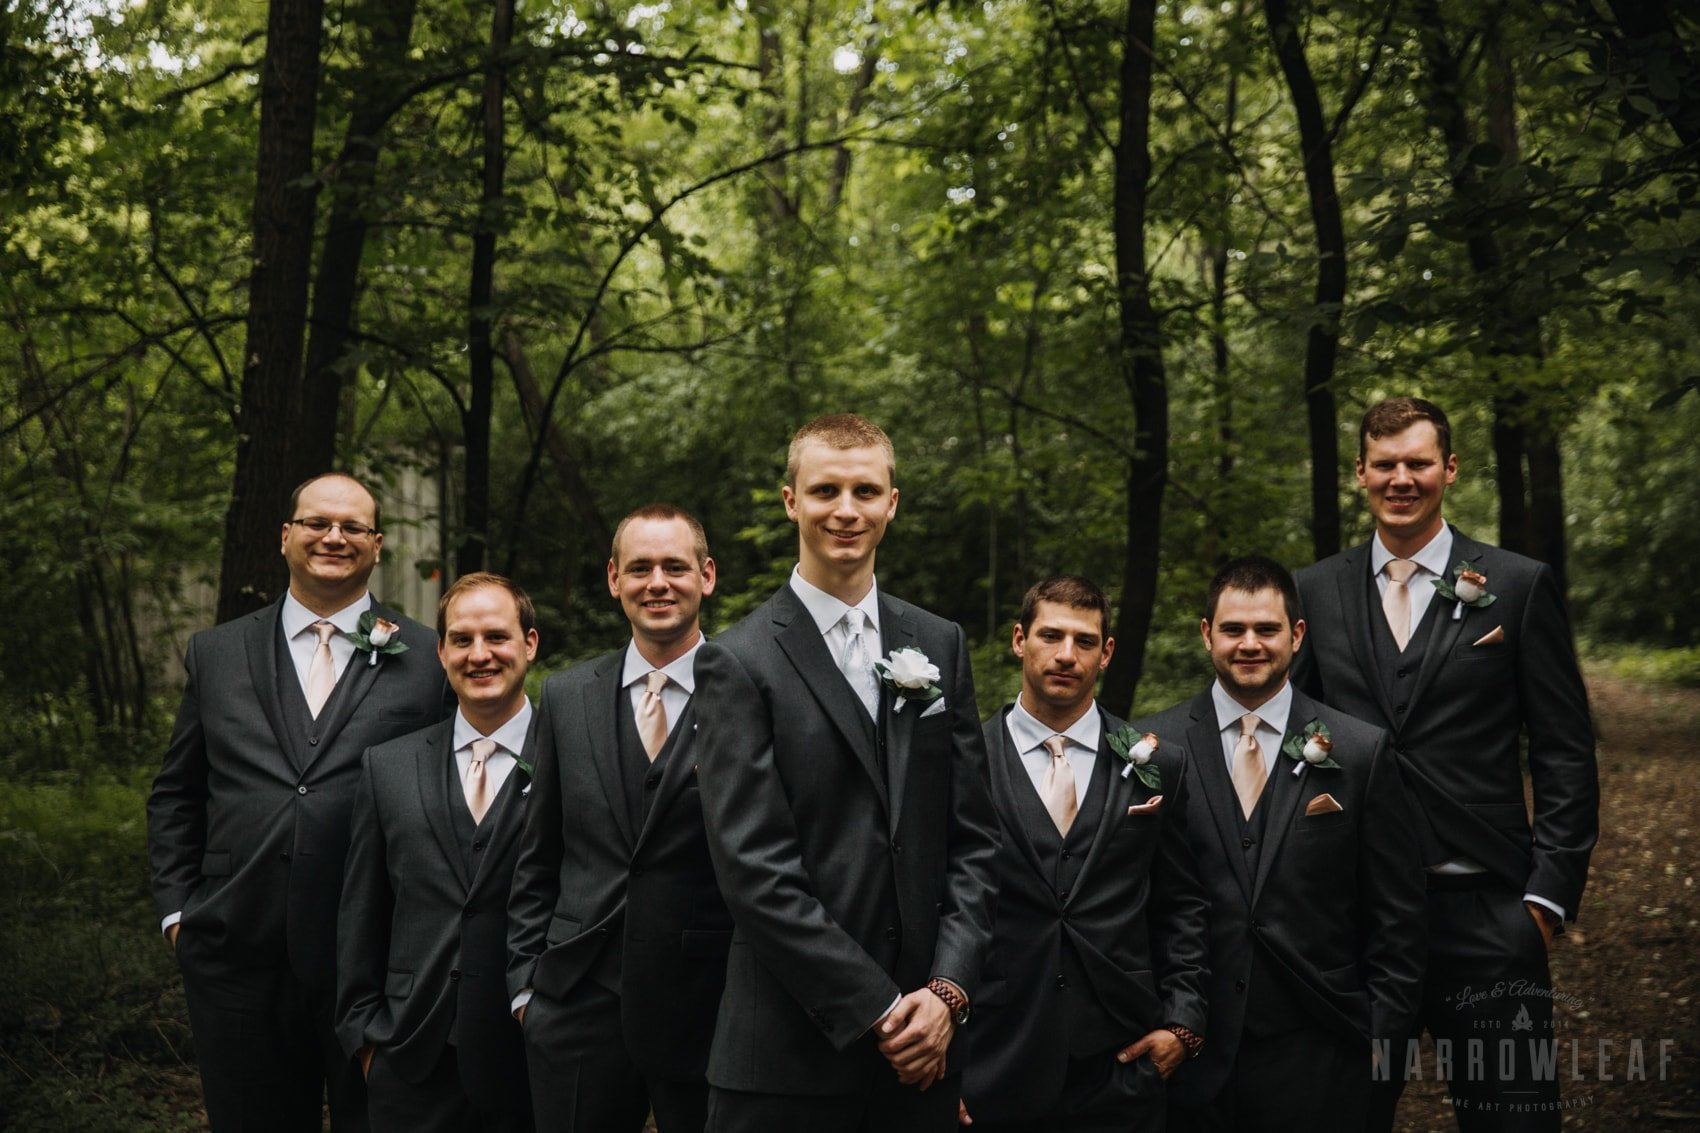 Camp-wooded-wedding-style-midwest-wi-bridal-party-304.jpg.jpg